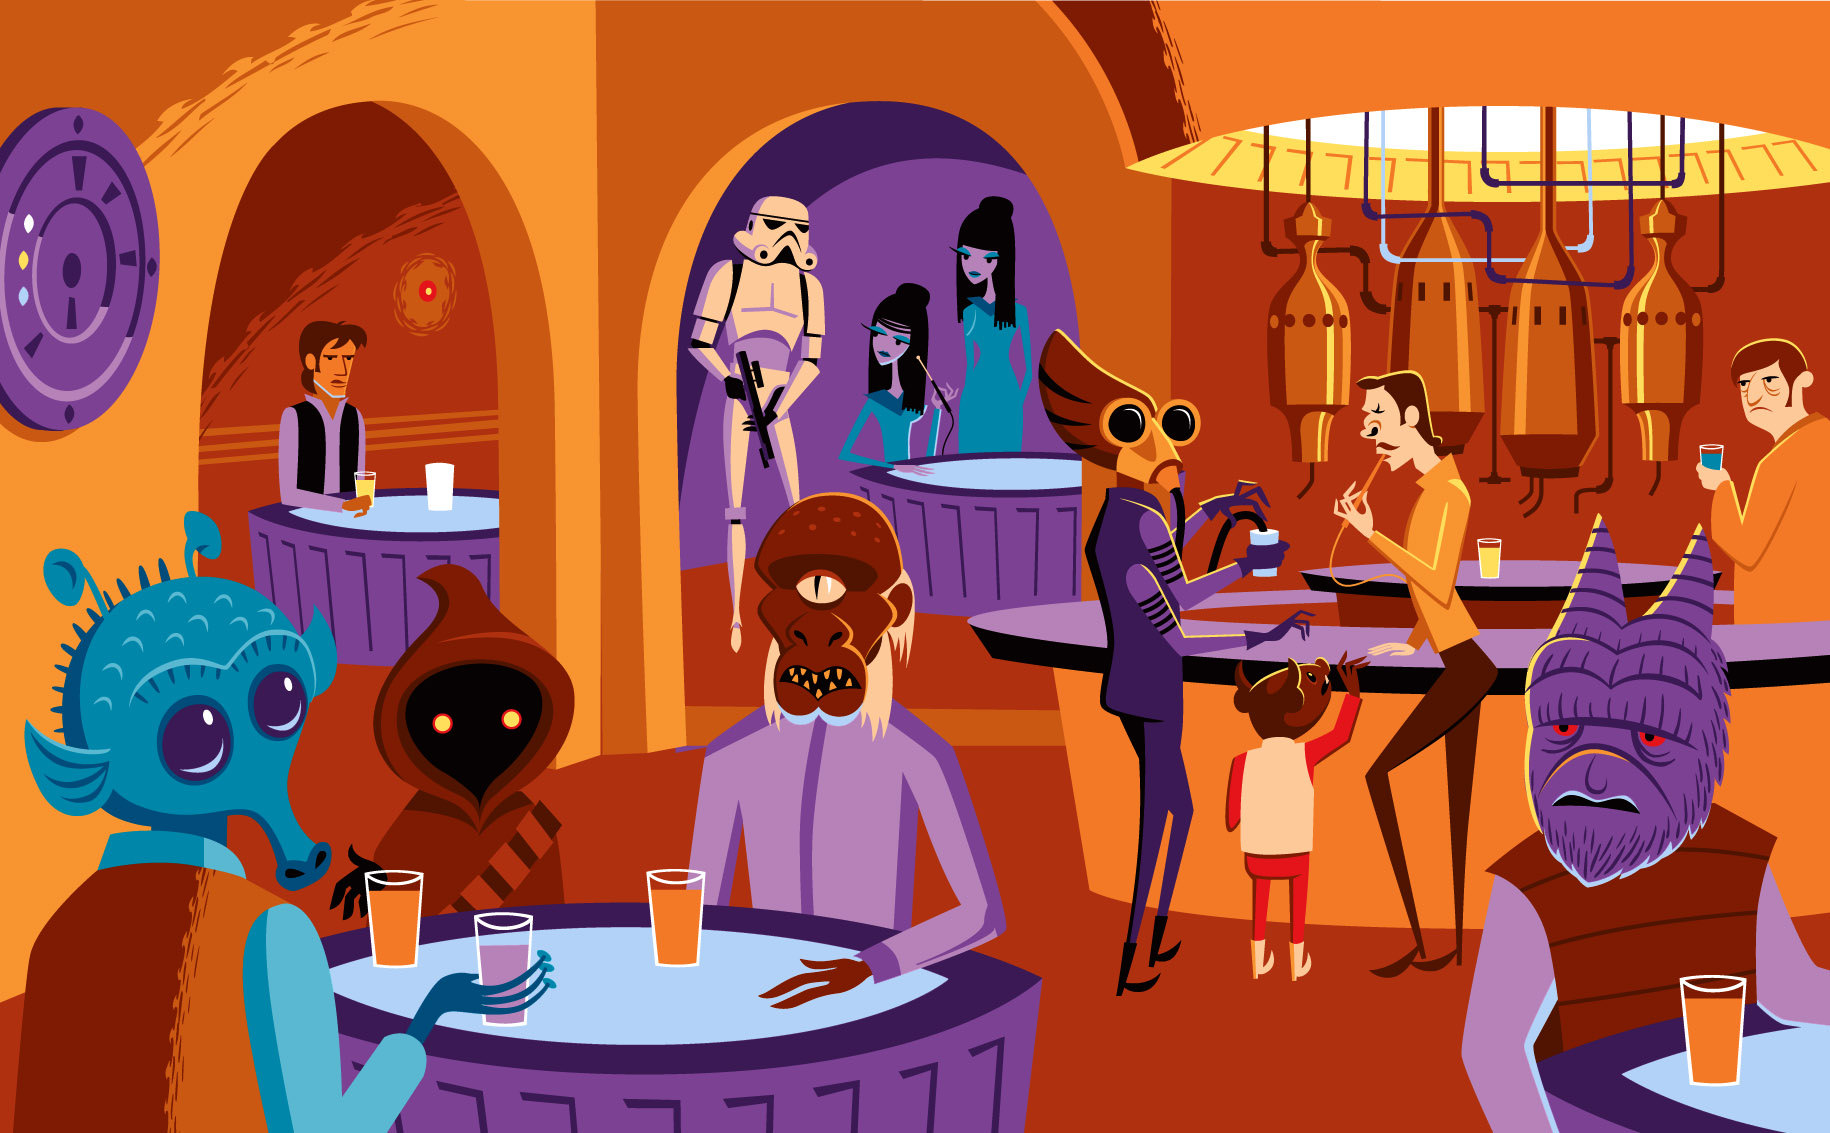 Mos Eisley Cantina Star Wars Artwork by SHAG — A Wretched Hive